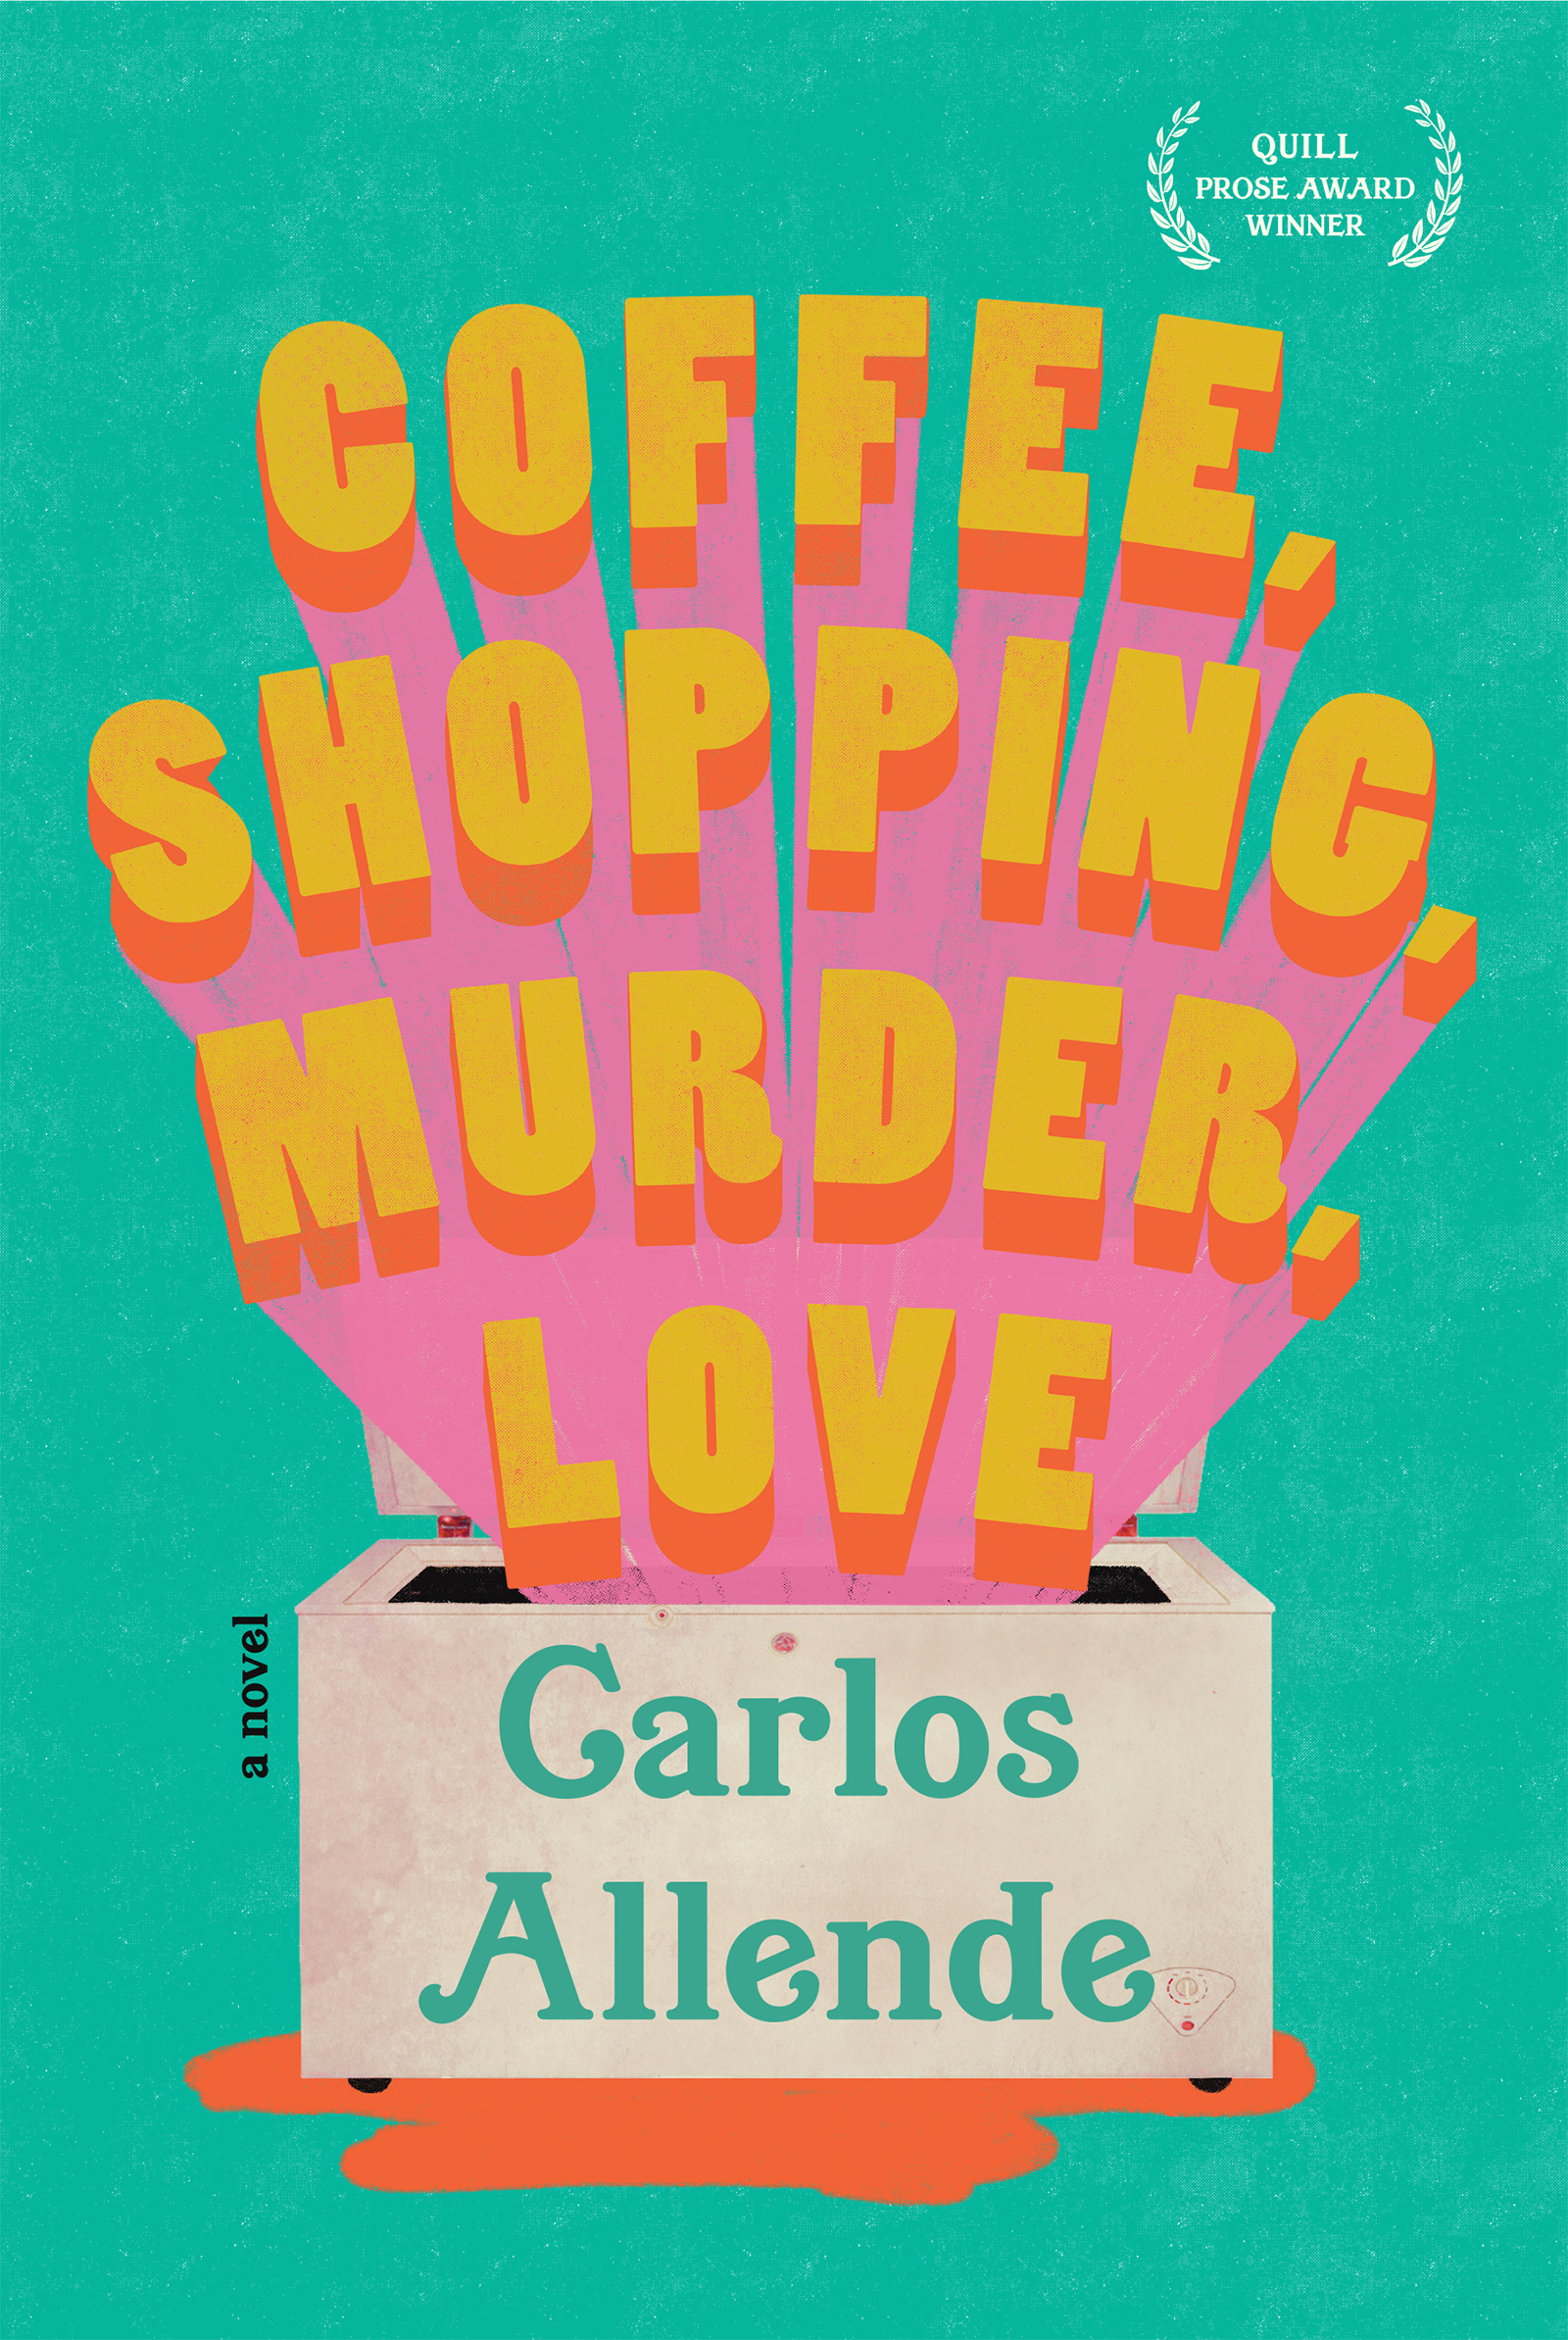 A freezer box with the title COFFEE SHOPPING MURDER LOVE a novel by Carlos Allende in yellow and pink text coming out of it on top of a teal background